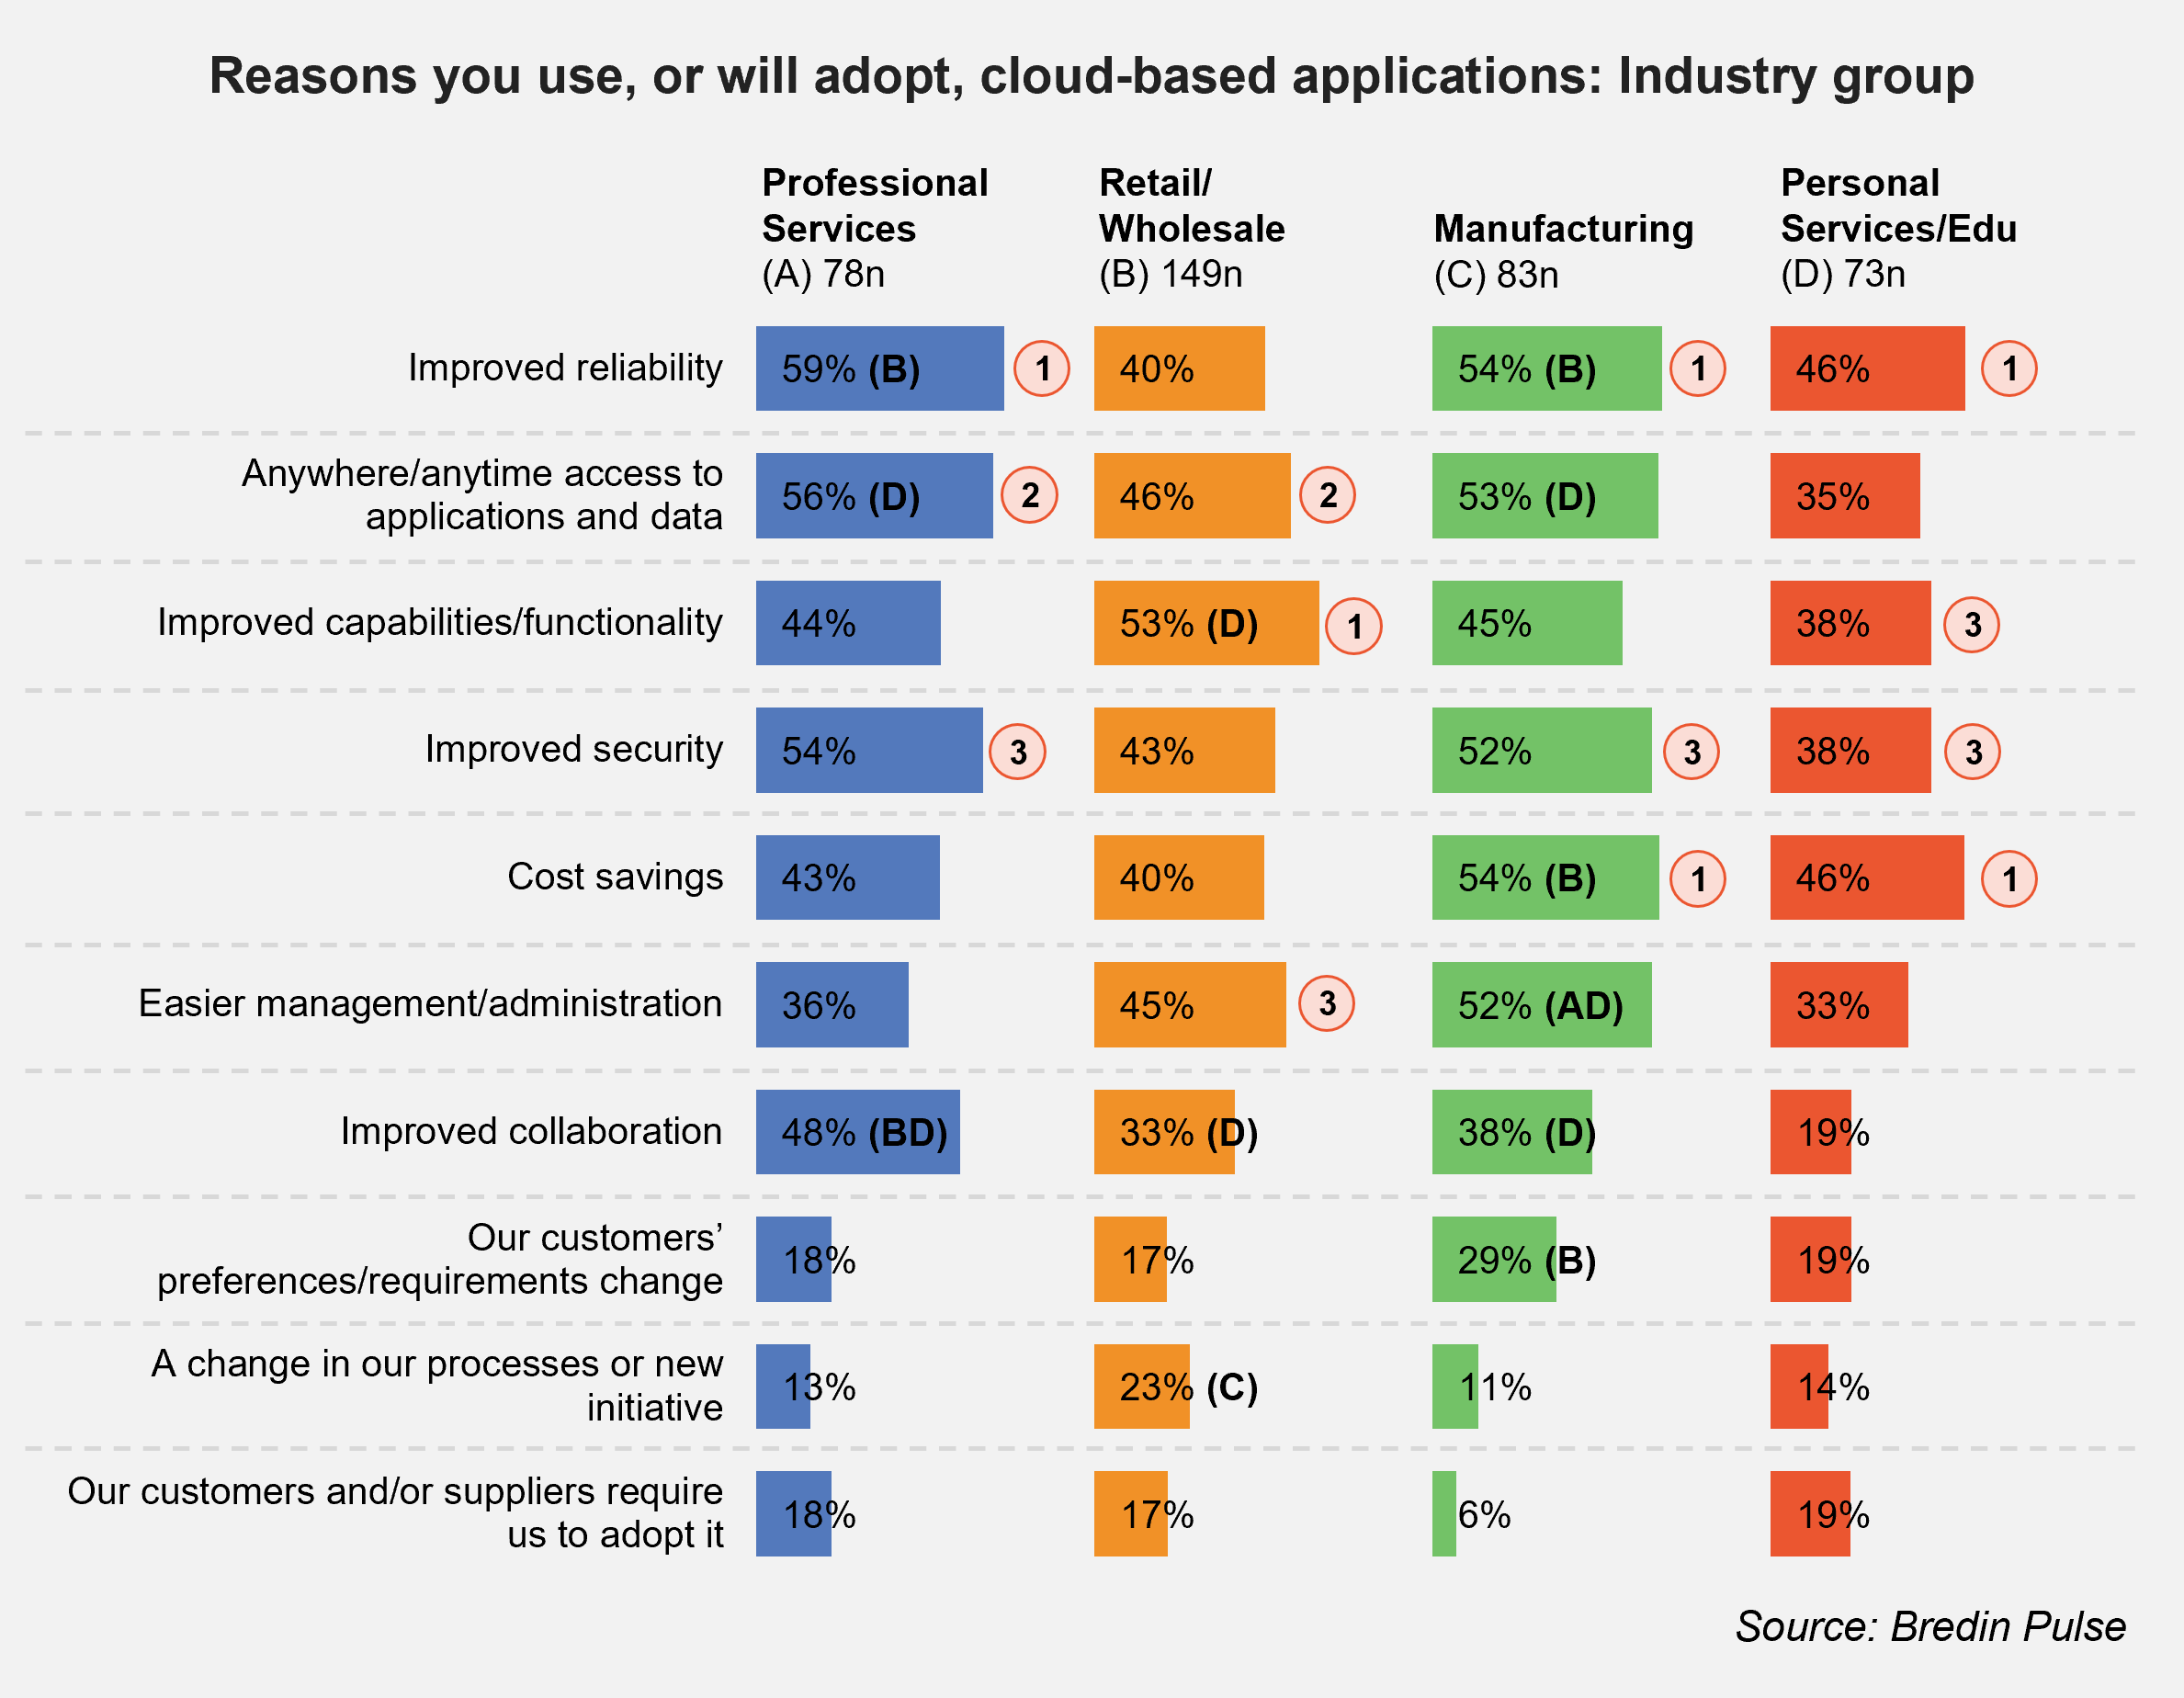 Reasons you use, or will adopt, cloud-based applications by industry group